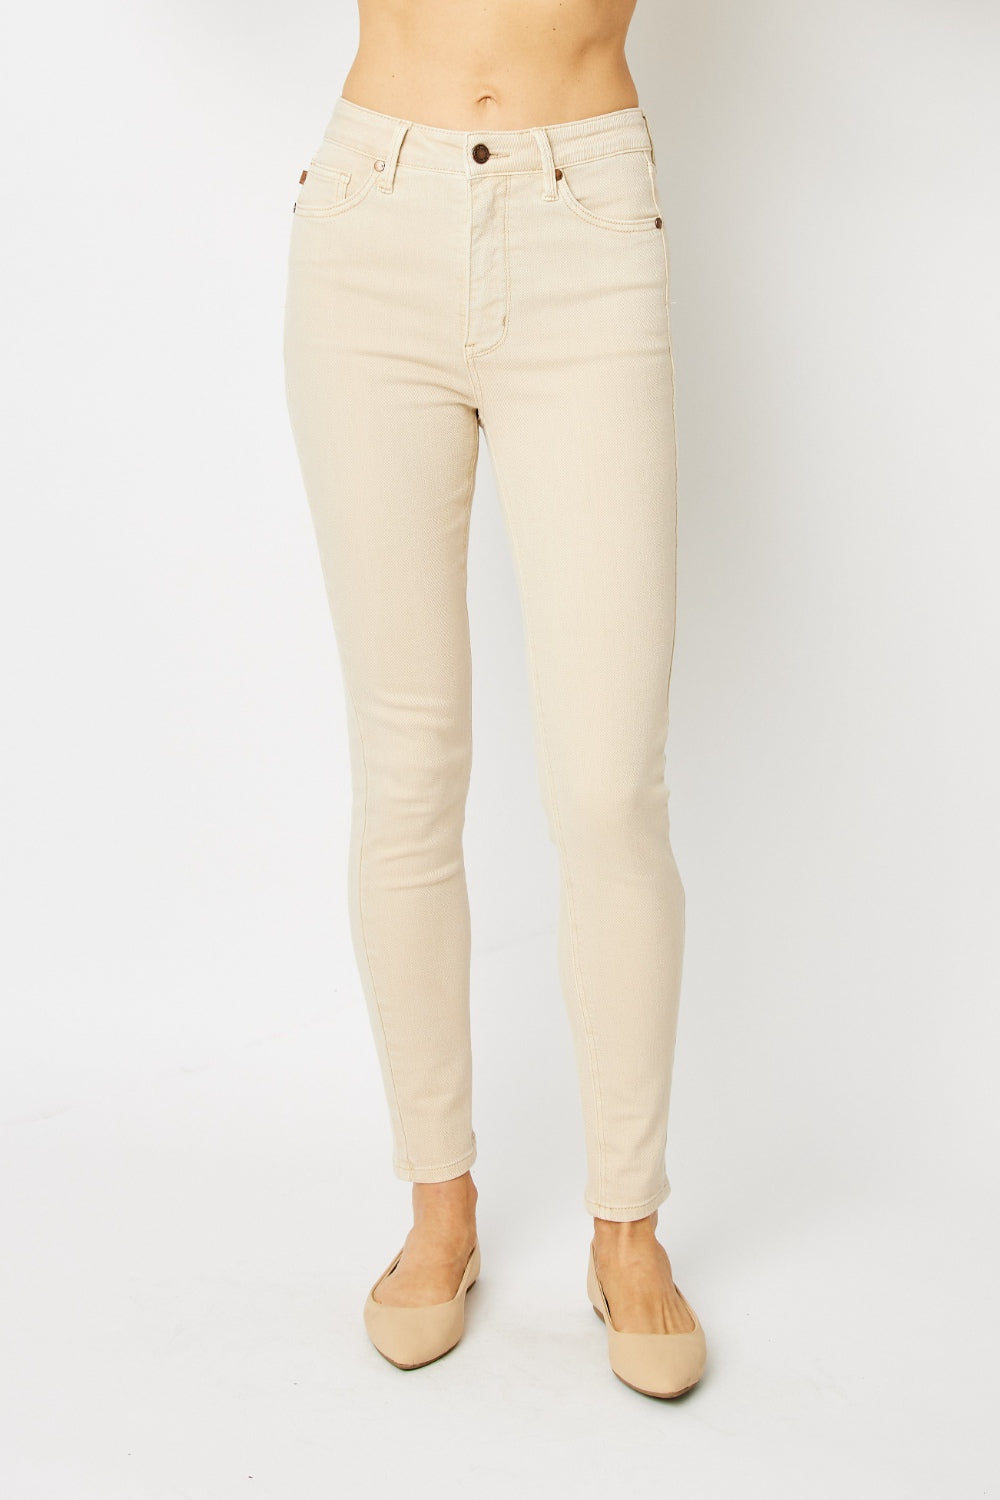 Judy Blue Full Size Garment Dyed Tummy Control Skinny Jeans | us.meeeshop